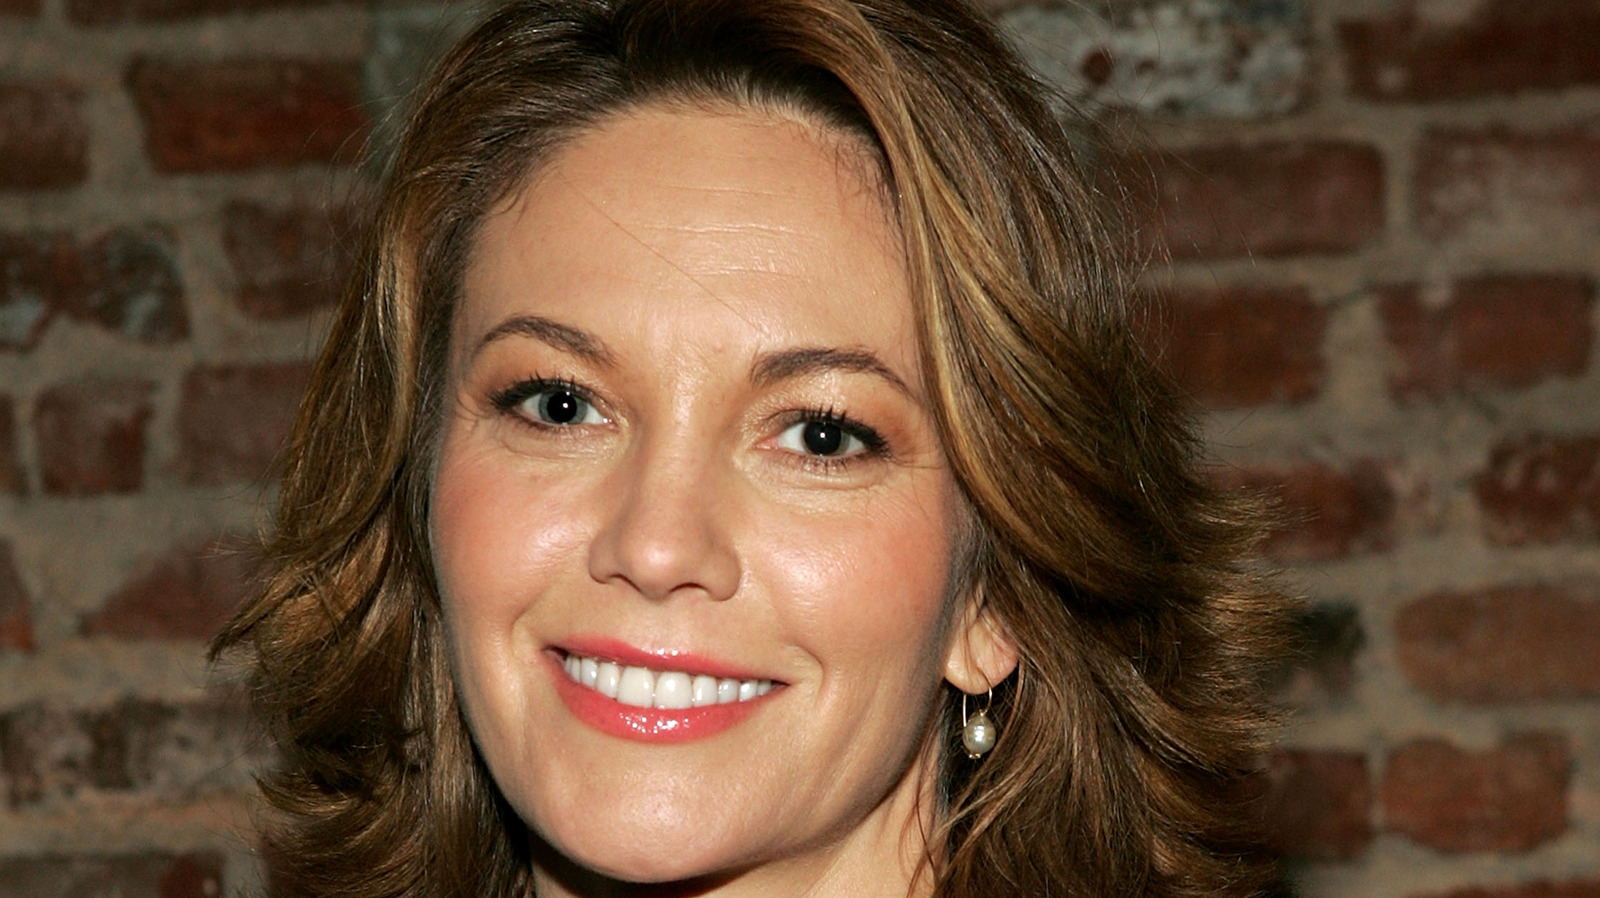 Kimberly Williams Paisley Porn - 30 Most Memorable Diane Lane Movies Ranked Worst To Best